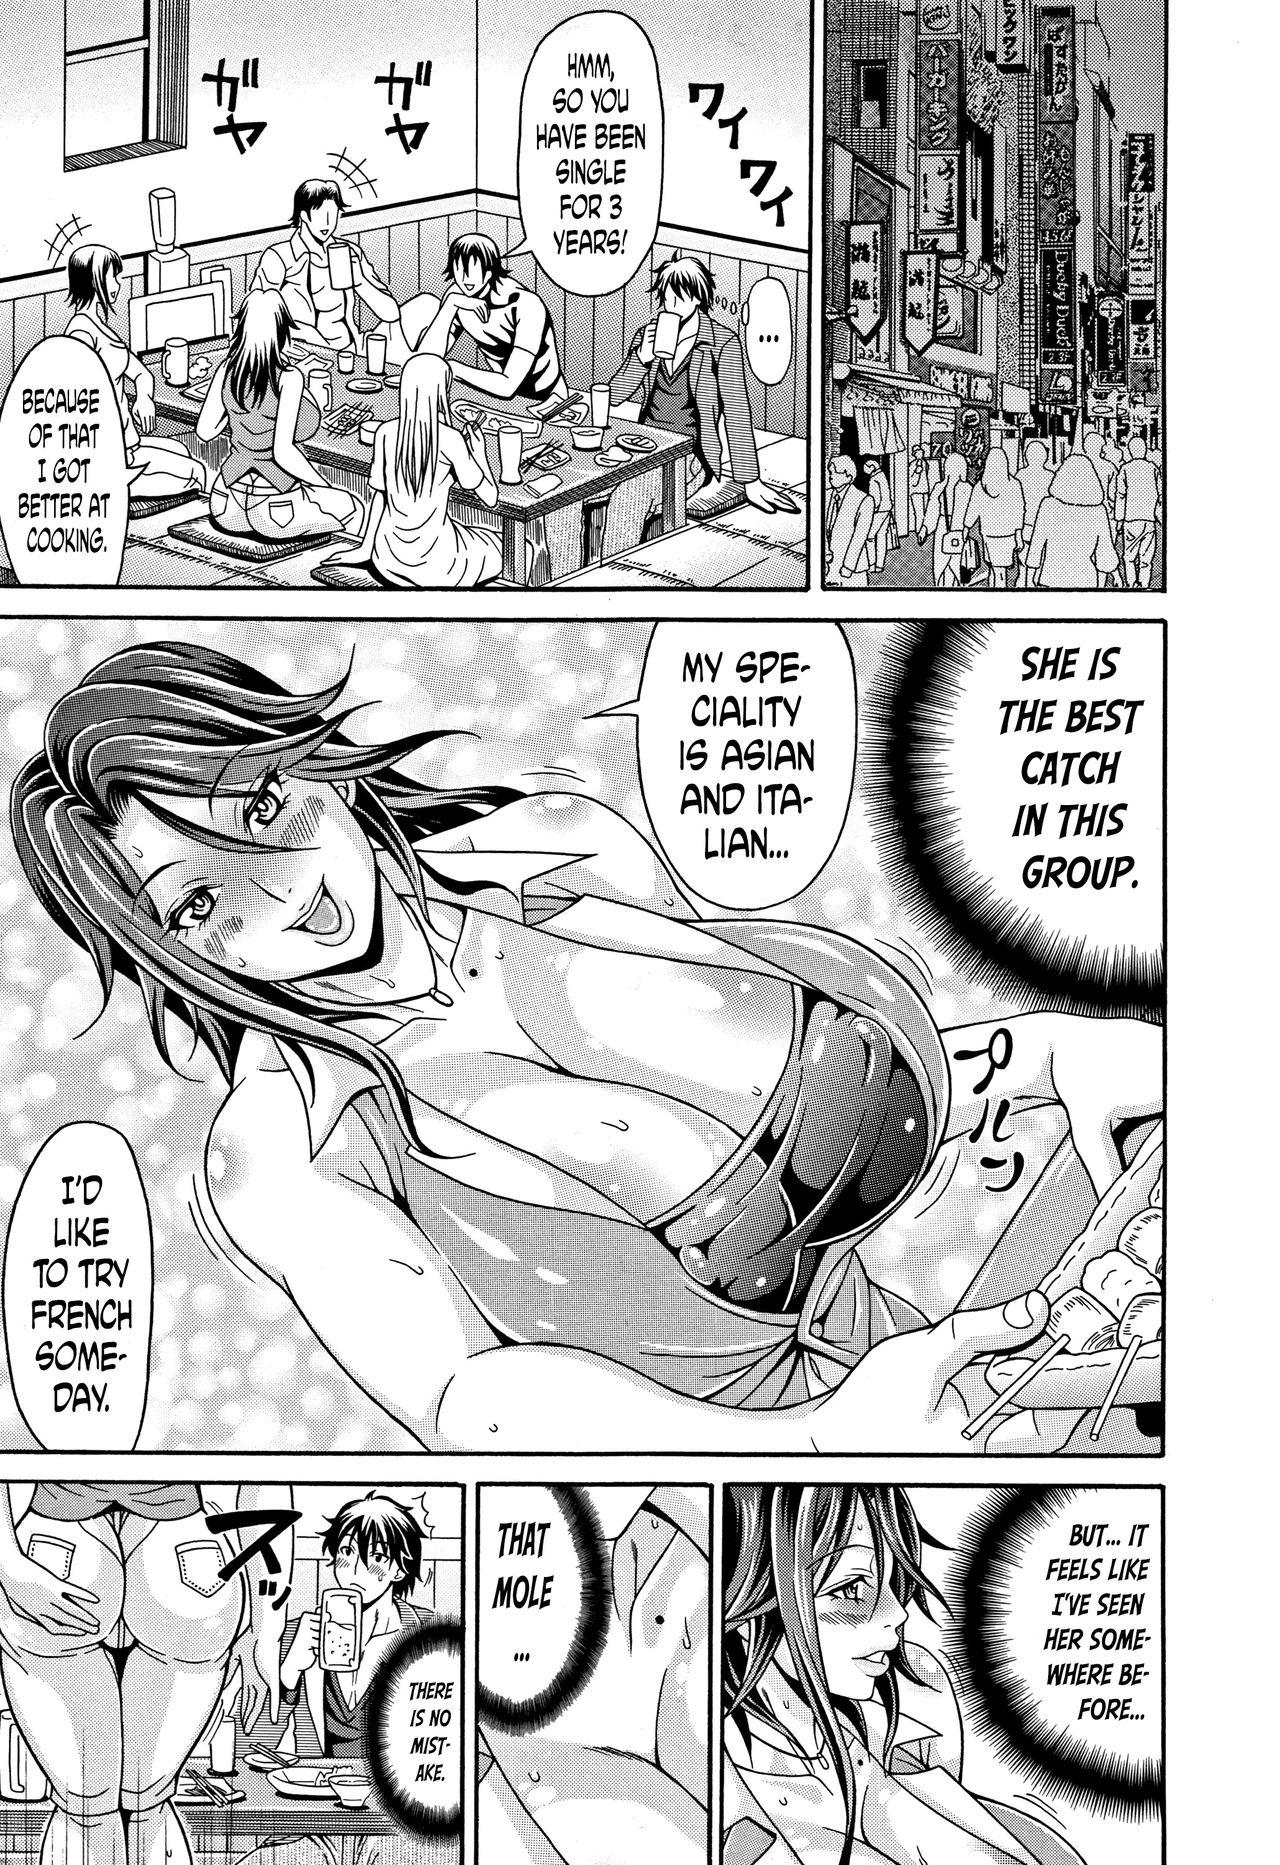 [Andou Hiroyuki] Mamire Chichi - Sticky Tits Feel Hot All Over. Ch.1-10 [English] [doujin-moe.us] 159